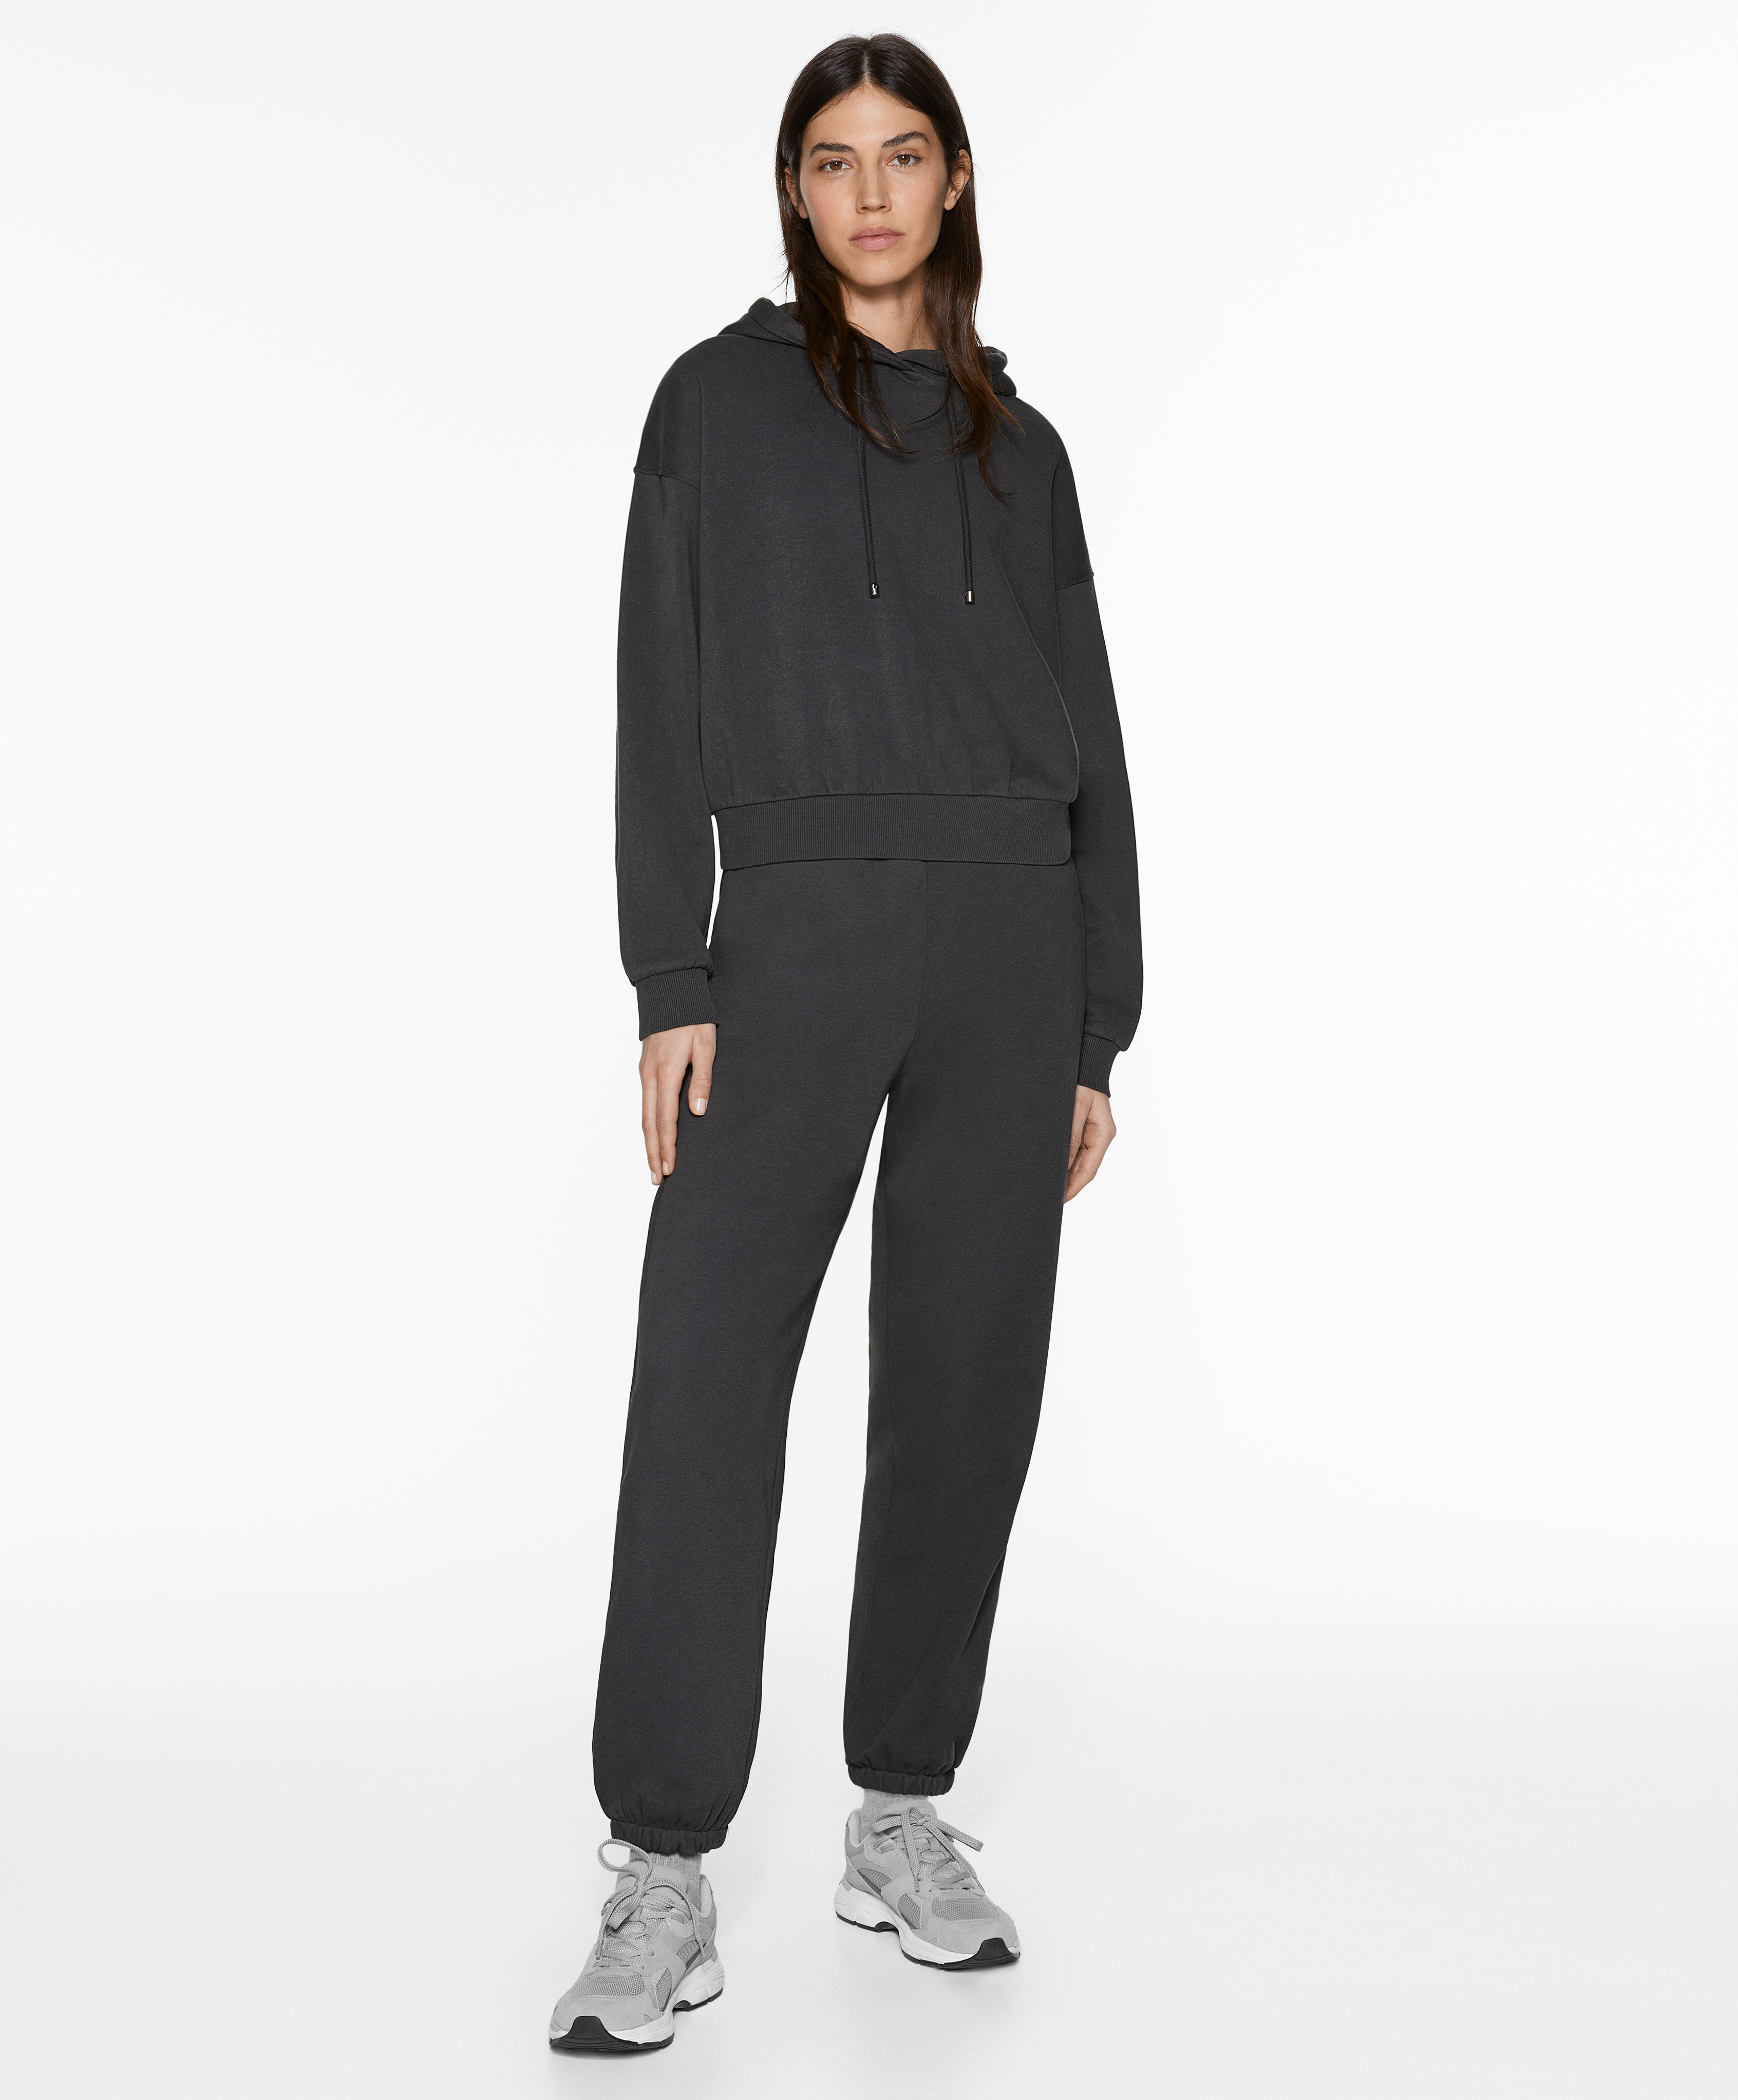 Anthracite washed cotton tracksuit